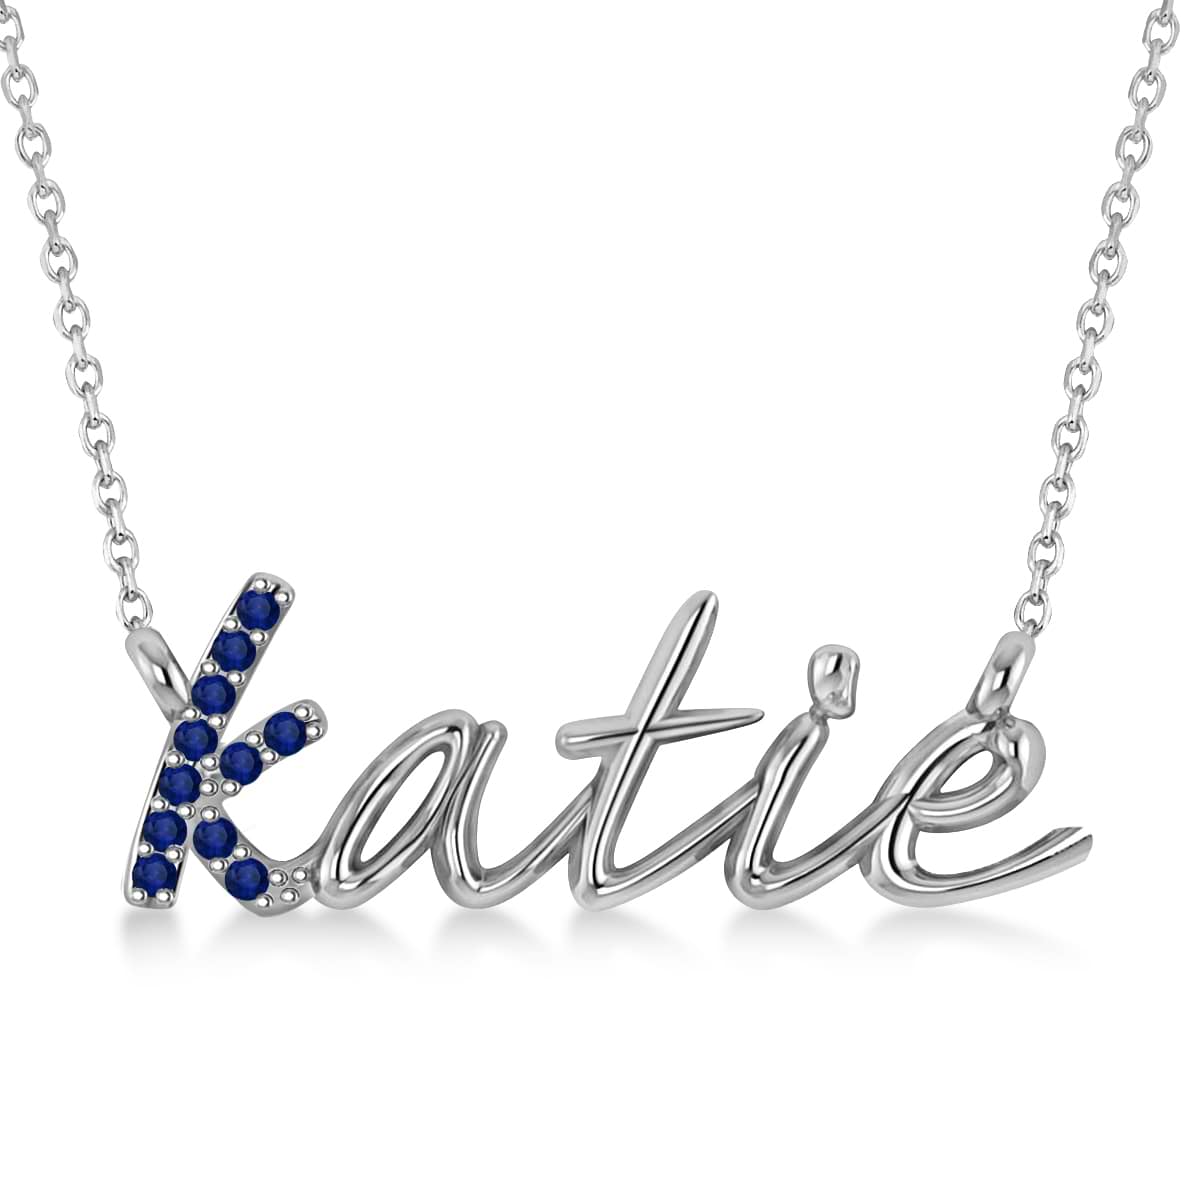 Personalized Blue Sapphire Nameplate Pendant Necklace 14k White Gold